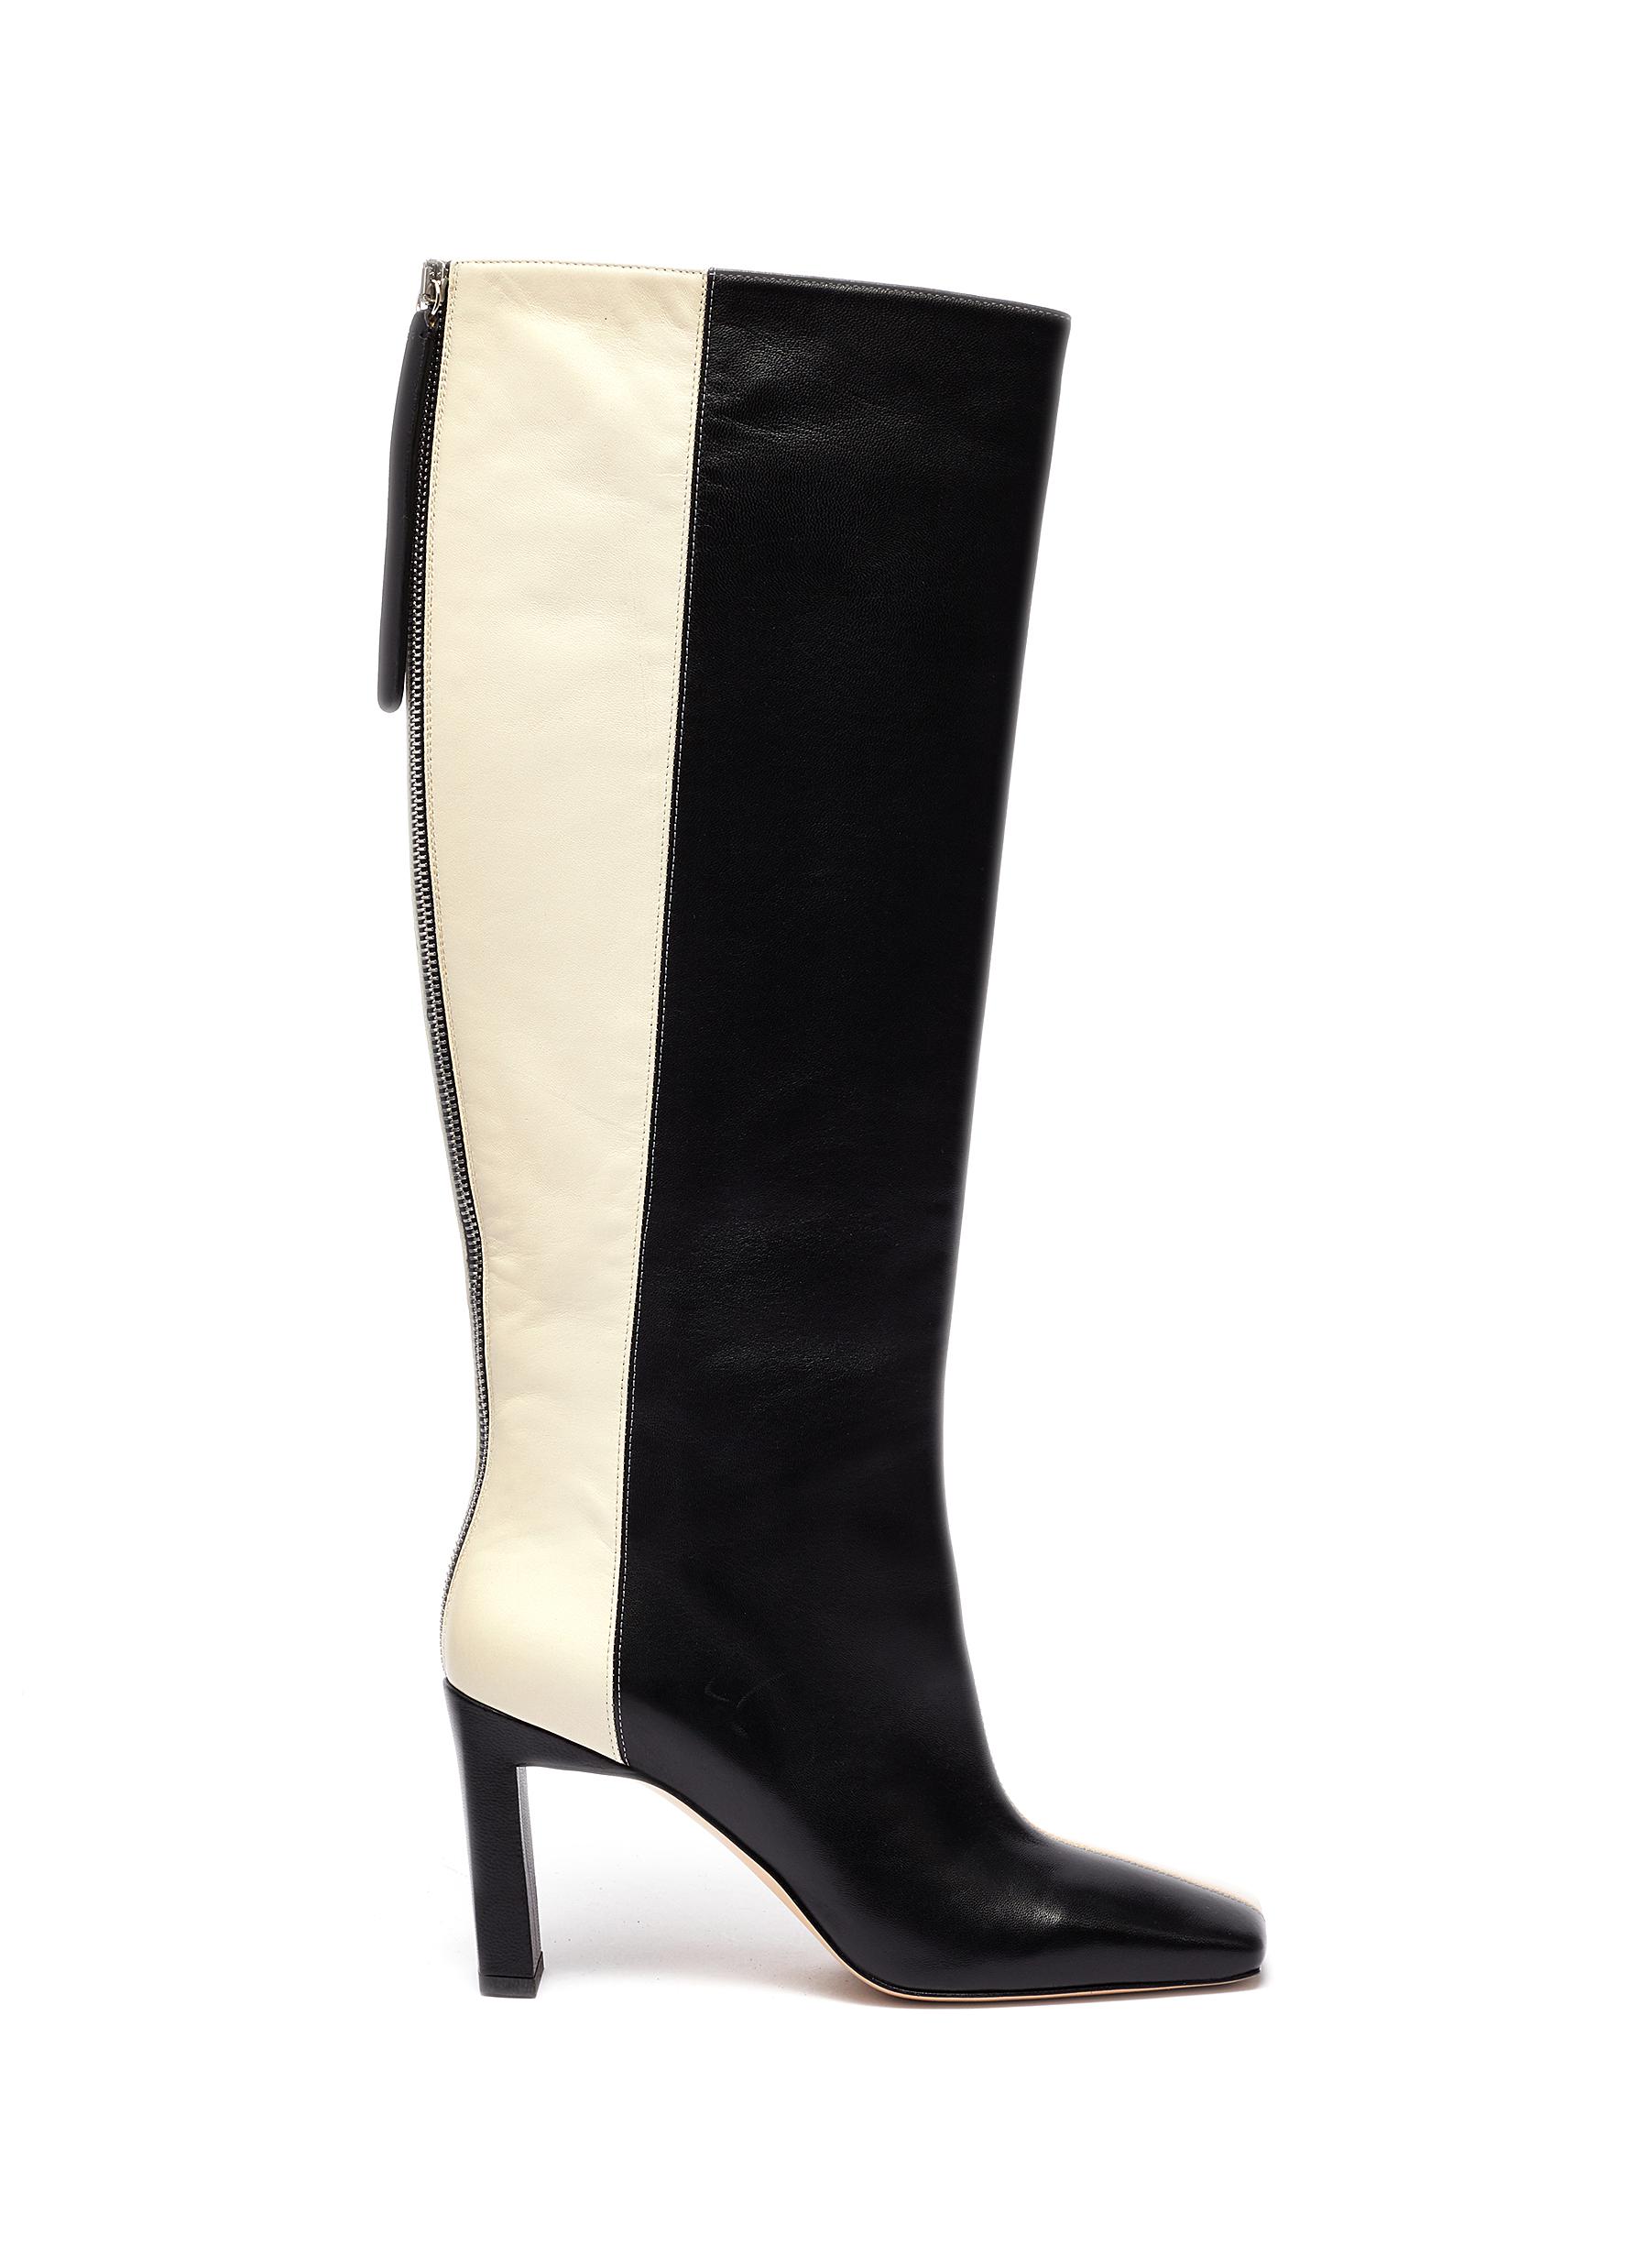 Wandler Boots Isa panelled knee high boots